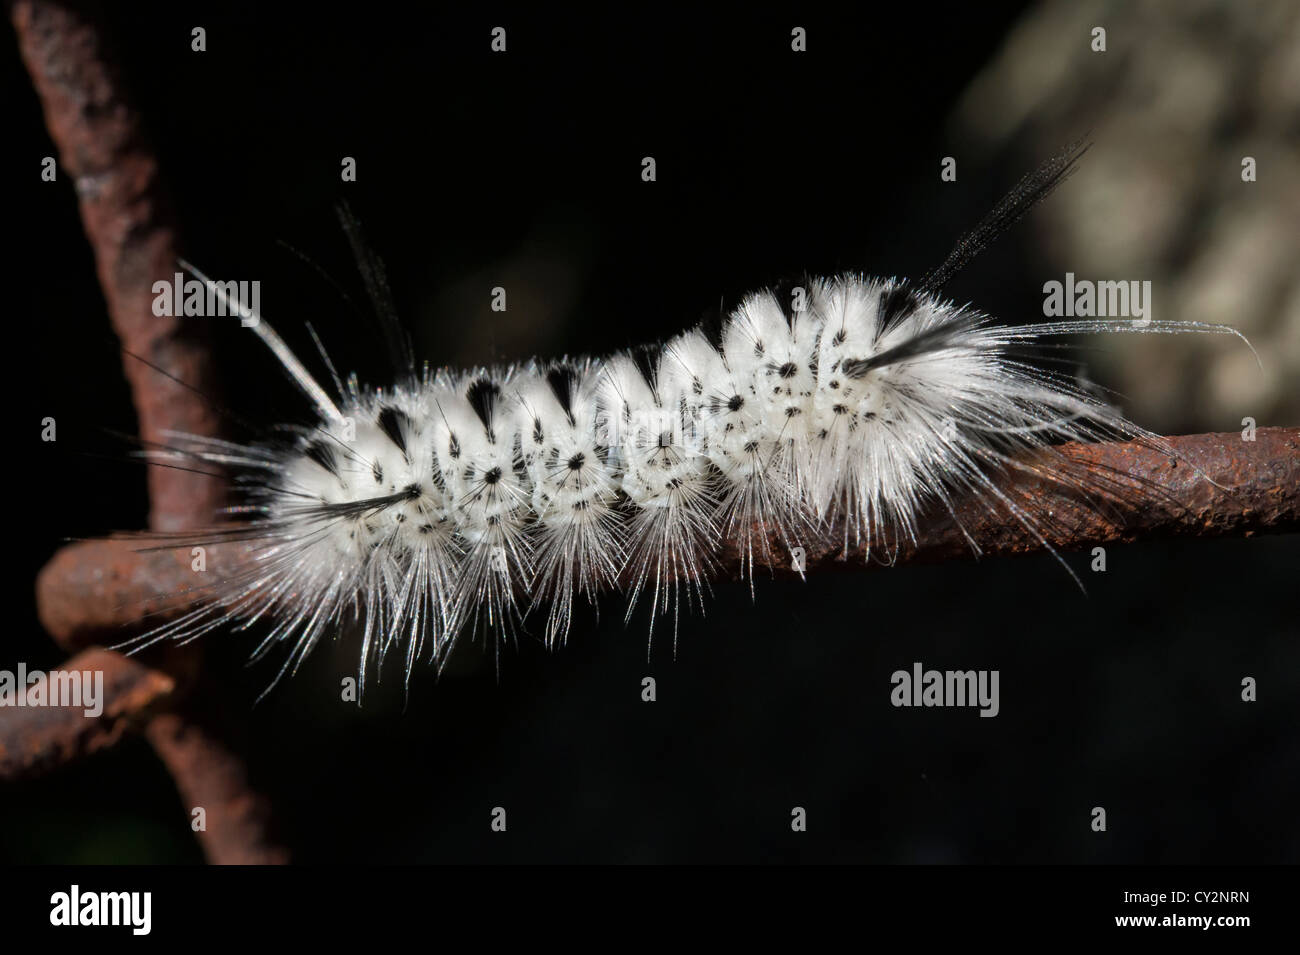 Closeup of a black-and-white caterpillar of the Hickory Tussock Moth (Lophocampa caryae) on a rusty chain-link fence. Stock Photo